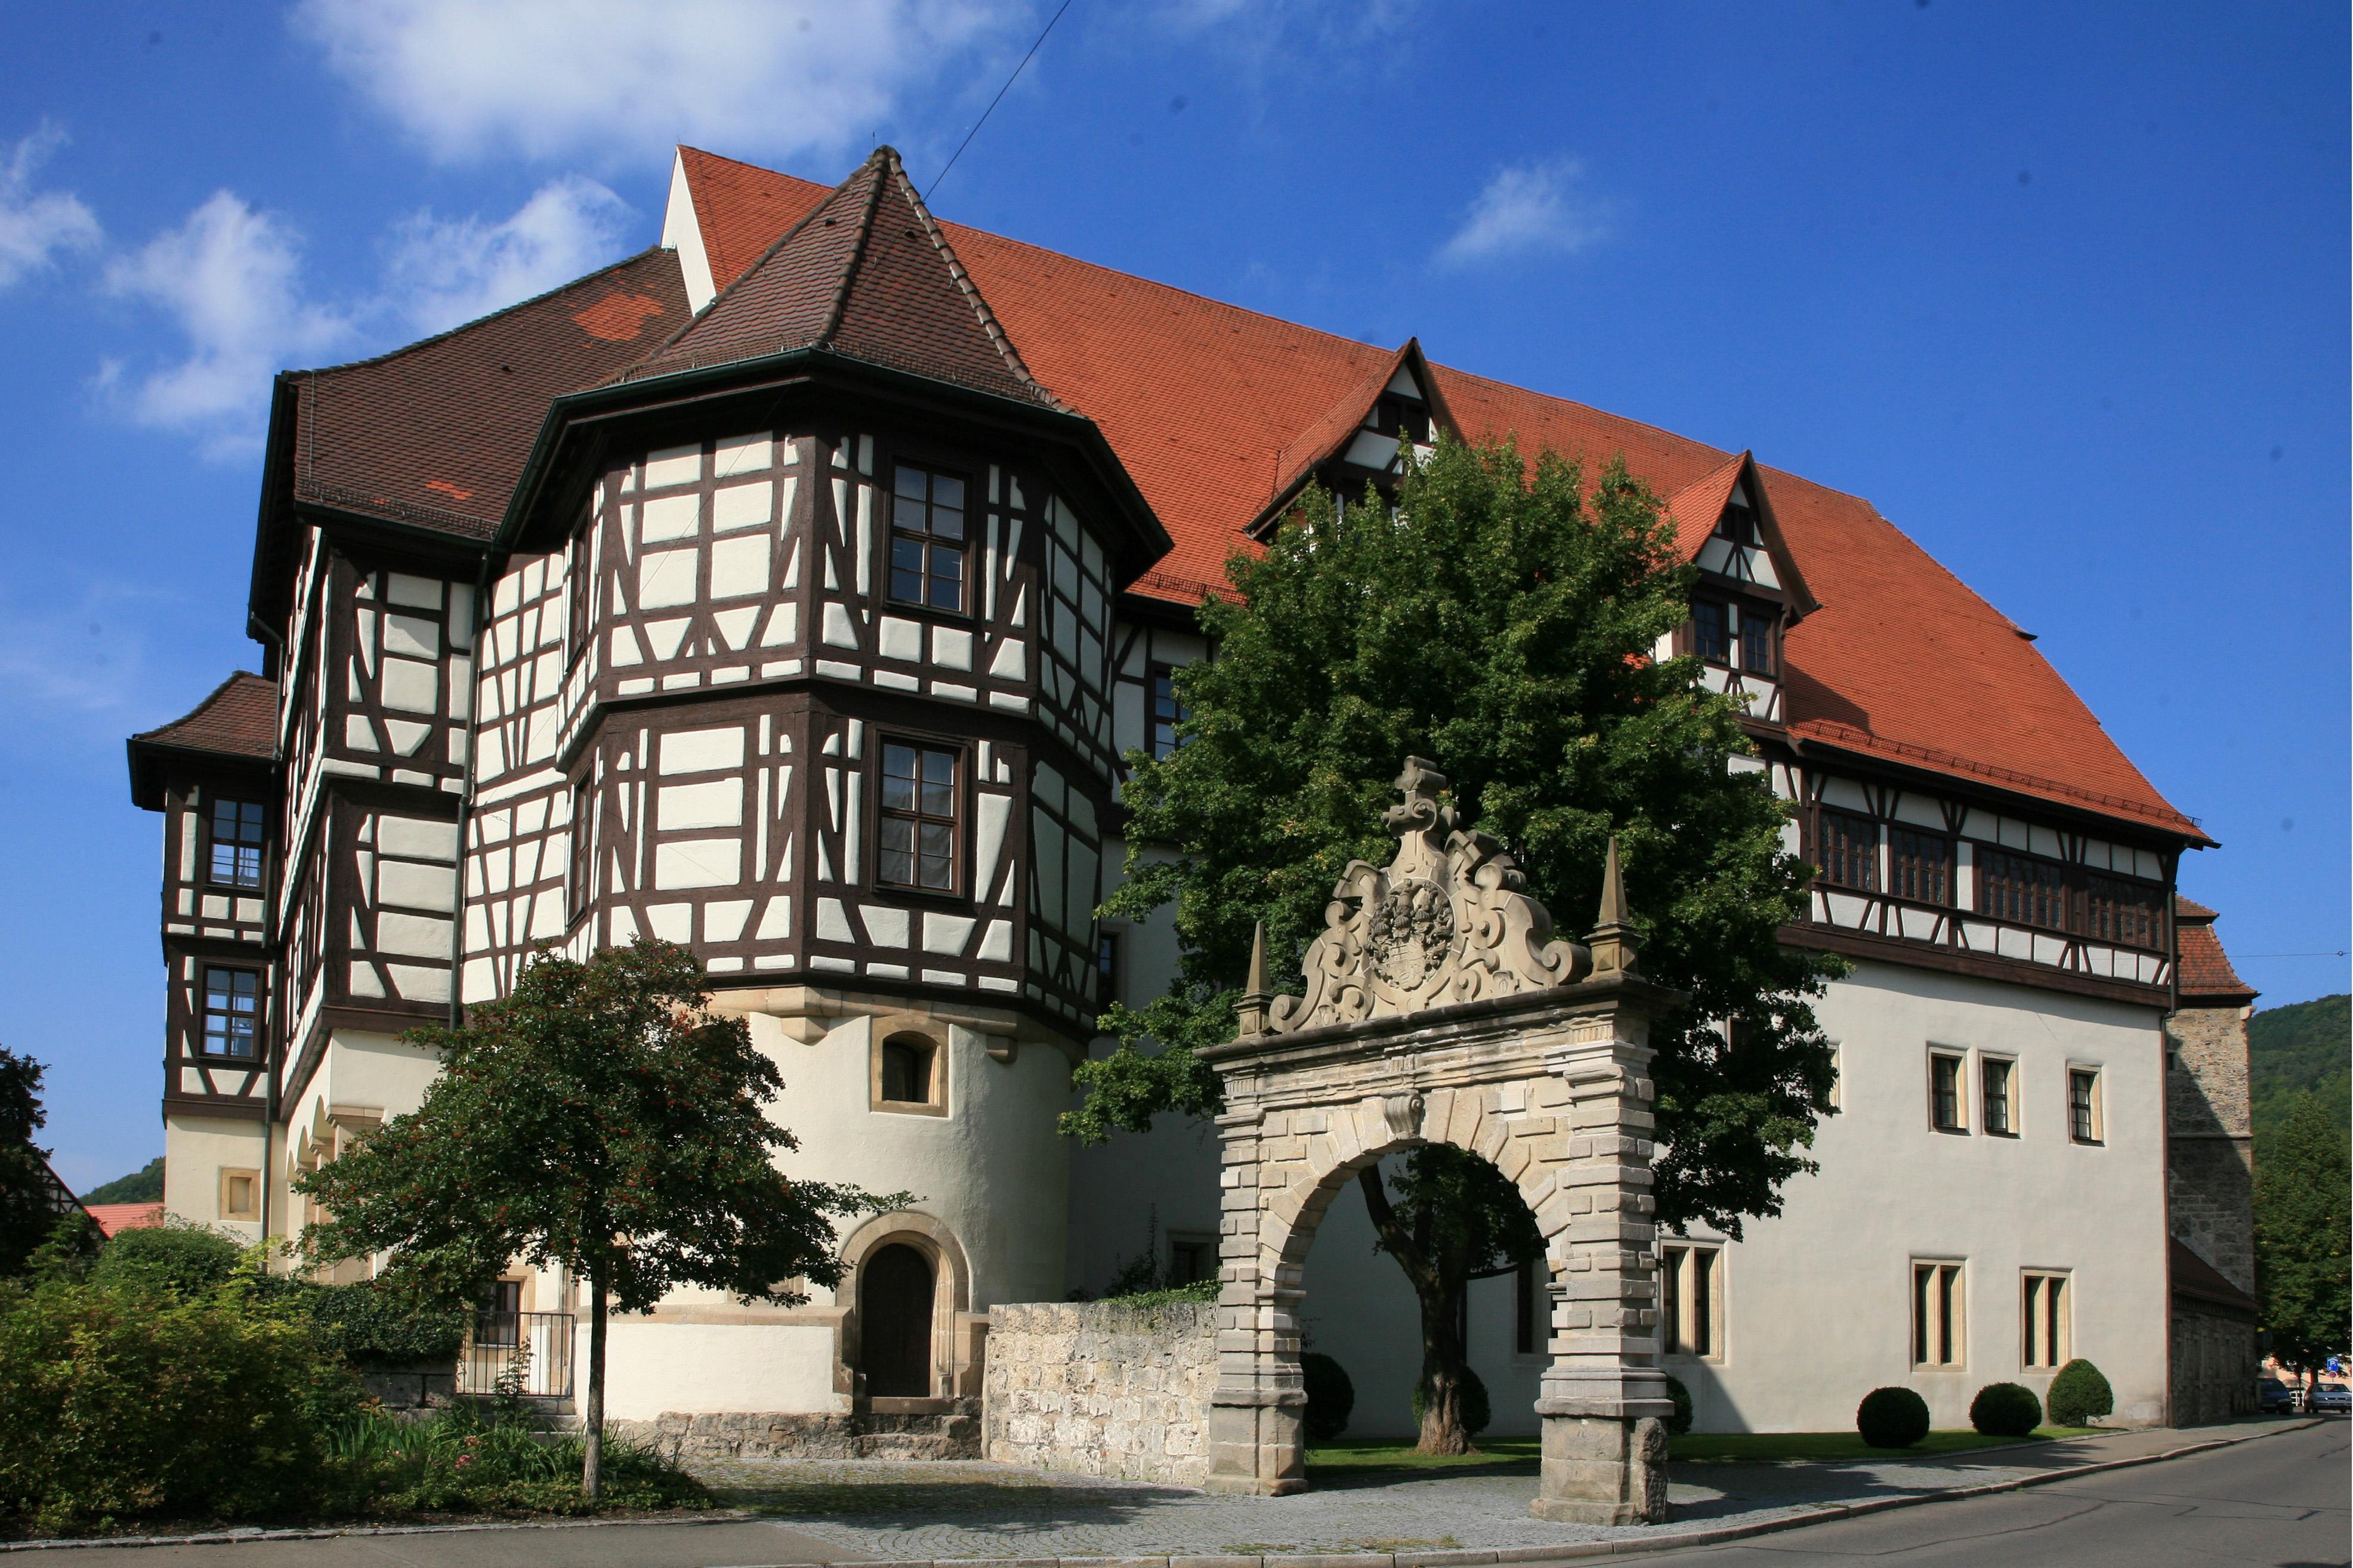 Exterior of Urach Palace and auxiliary buildings